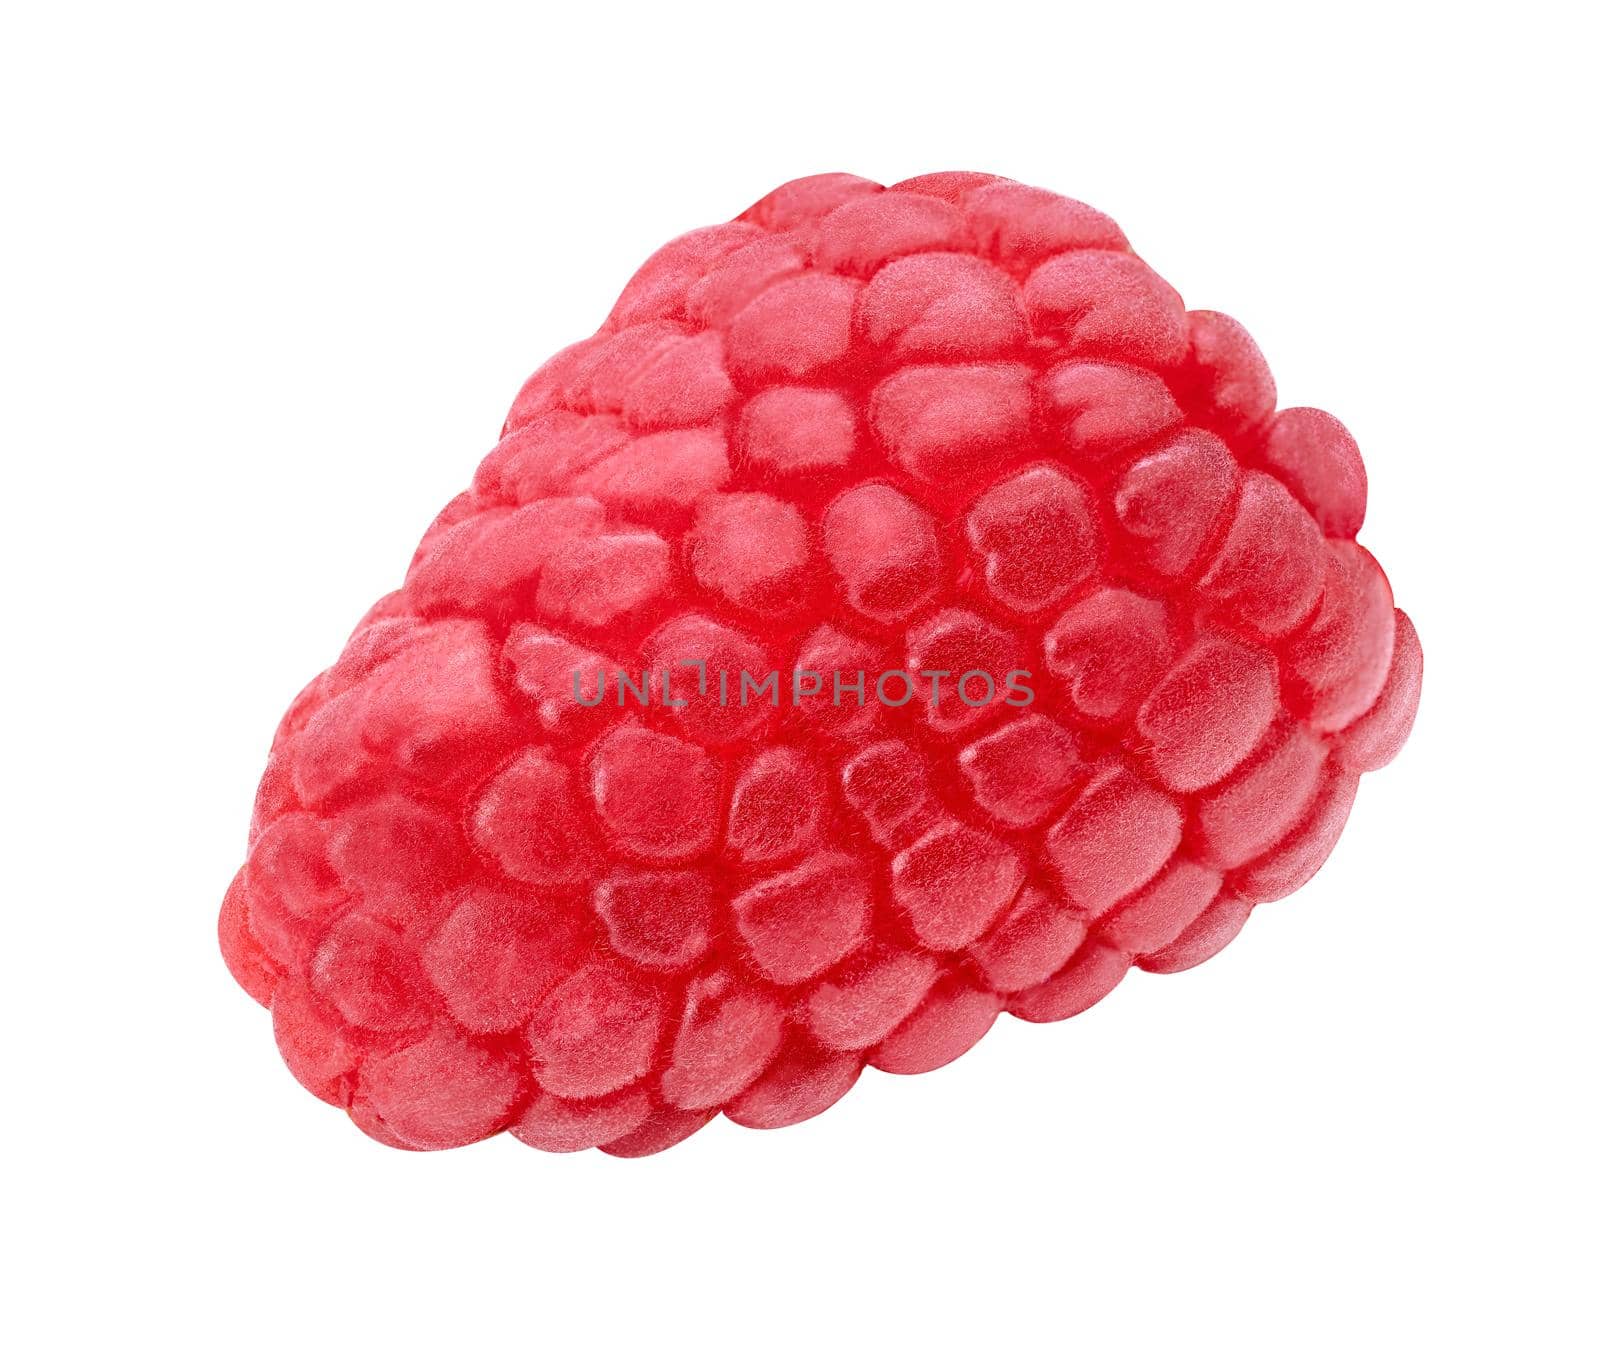 Raspberry macro isolate studio shot. Berry isolated on white background. Closeup for packaging design. Whole single raspberry close up cutout. Healthy organic food. Front view